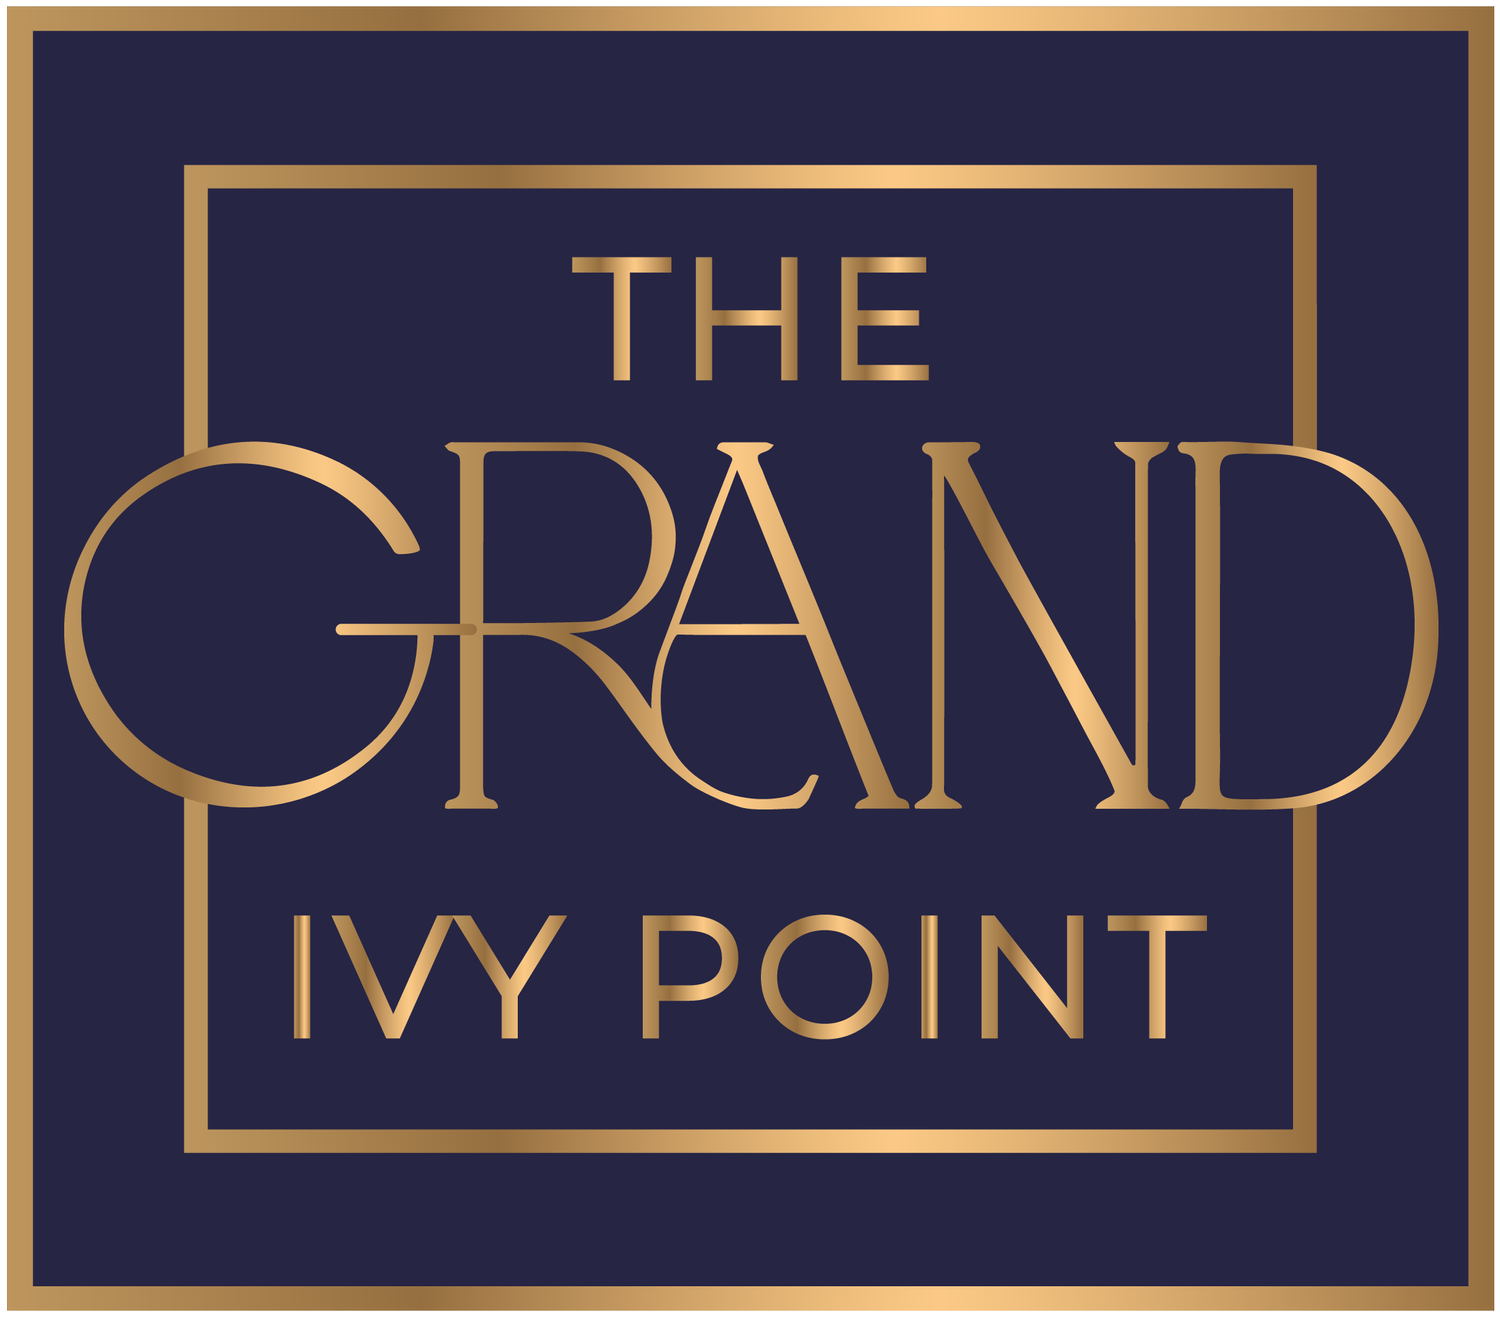 The Grand Ivy Point